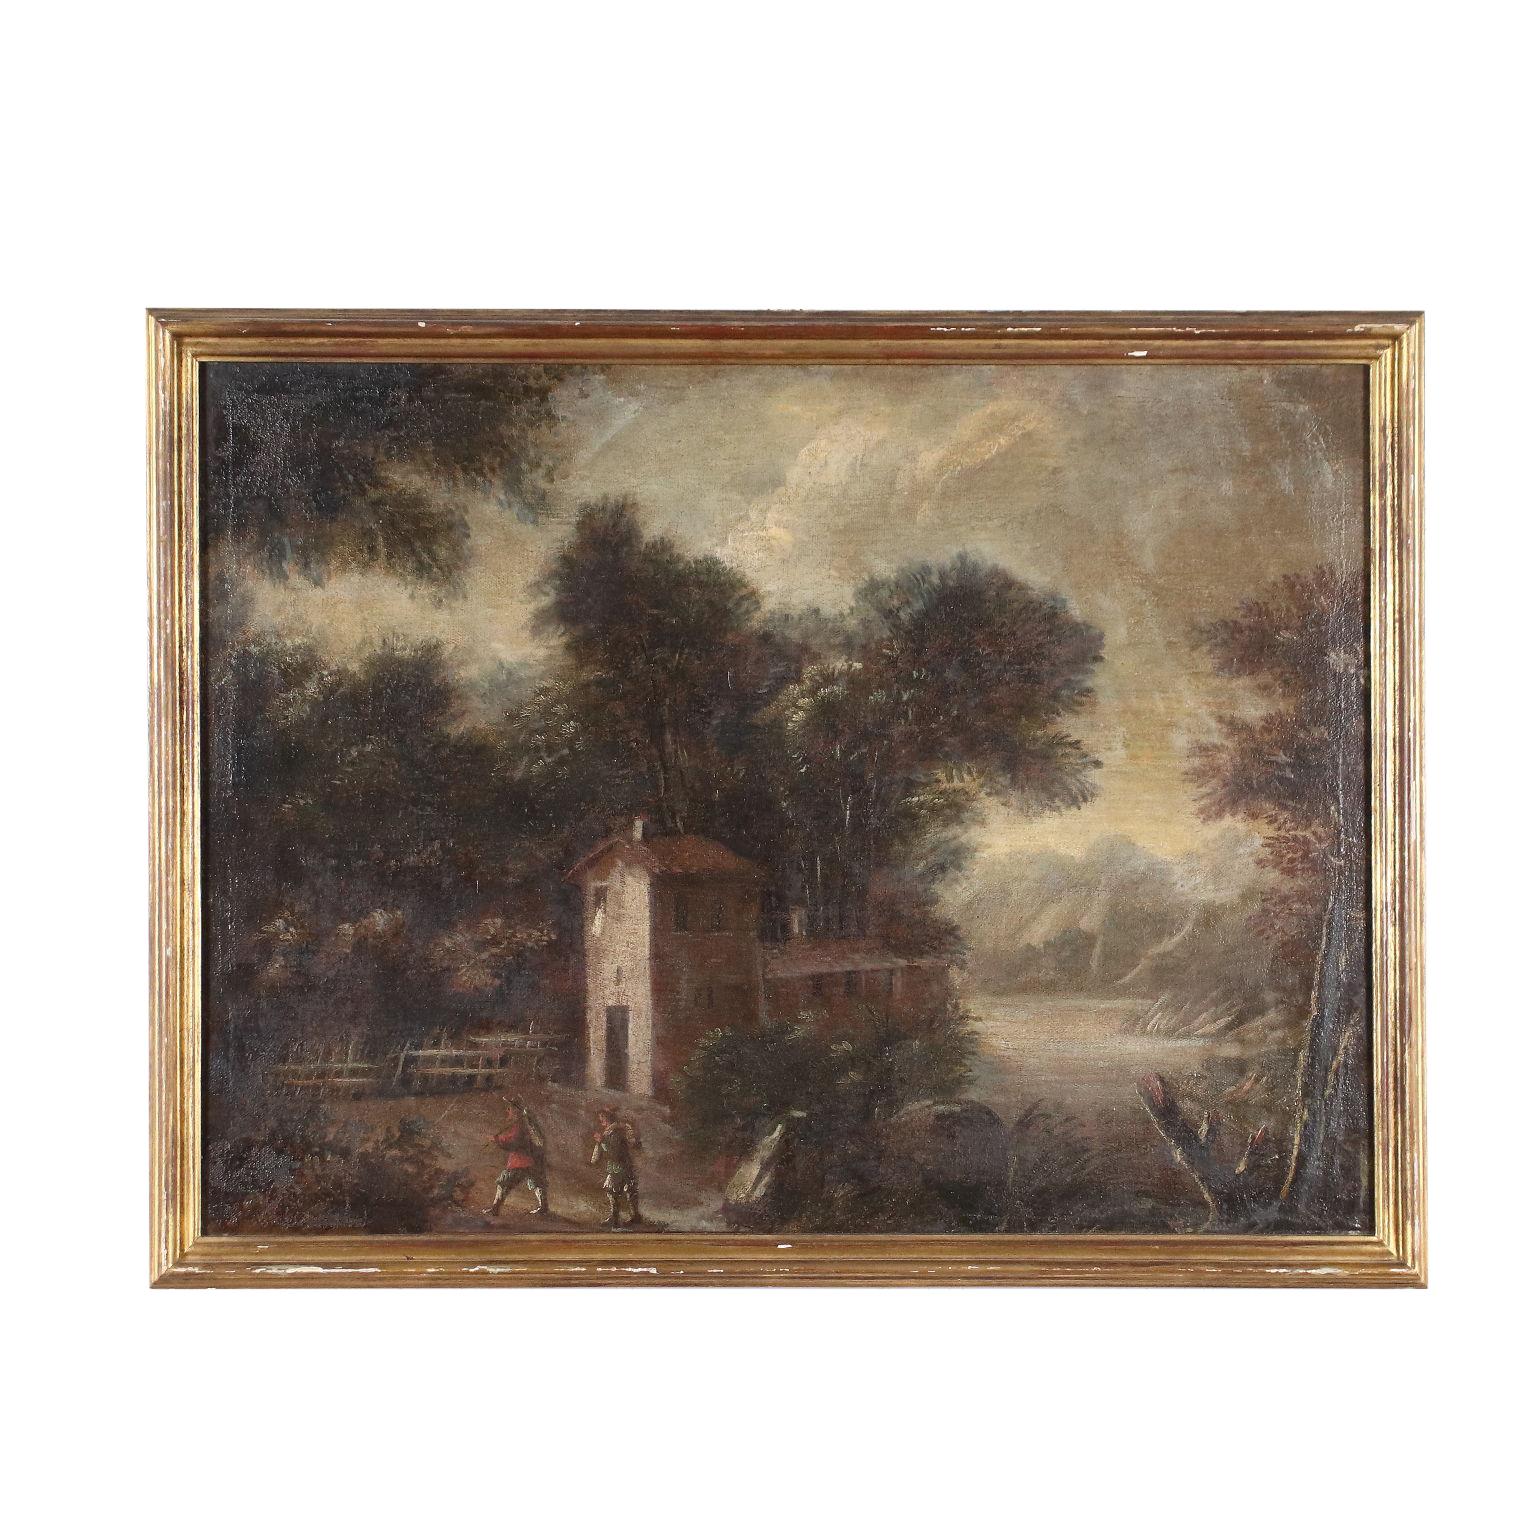 Unknown Landscape Painting - Landscape with Figures, oil on canvas, 18th century